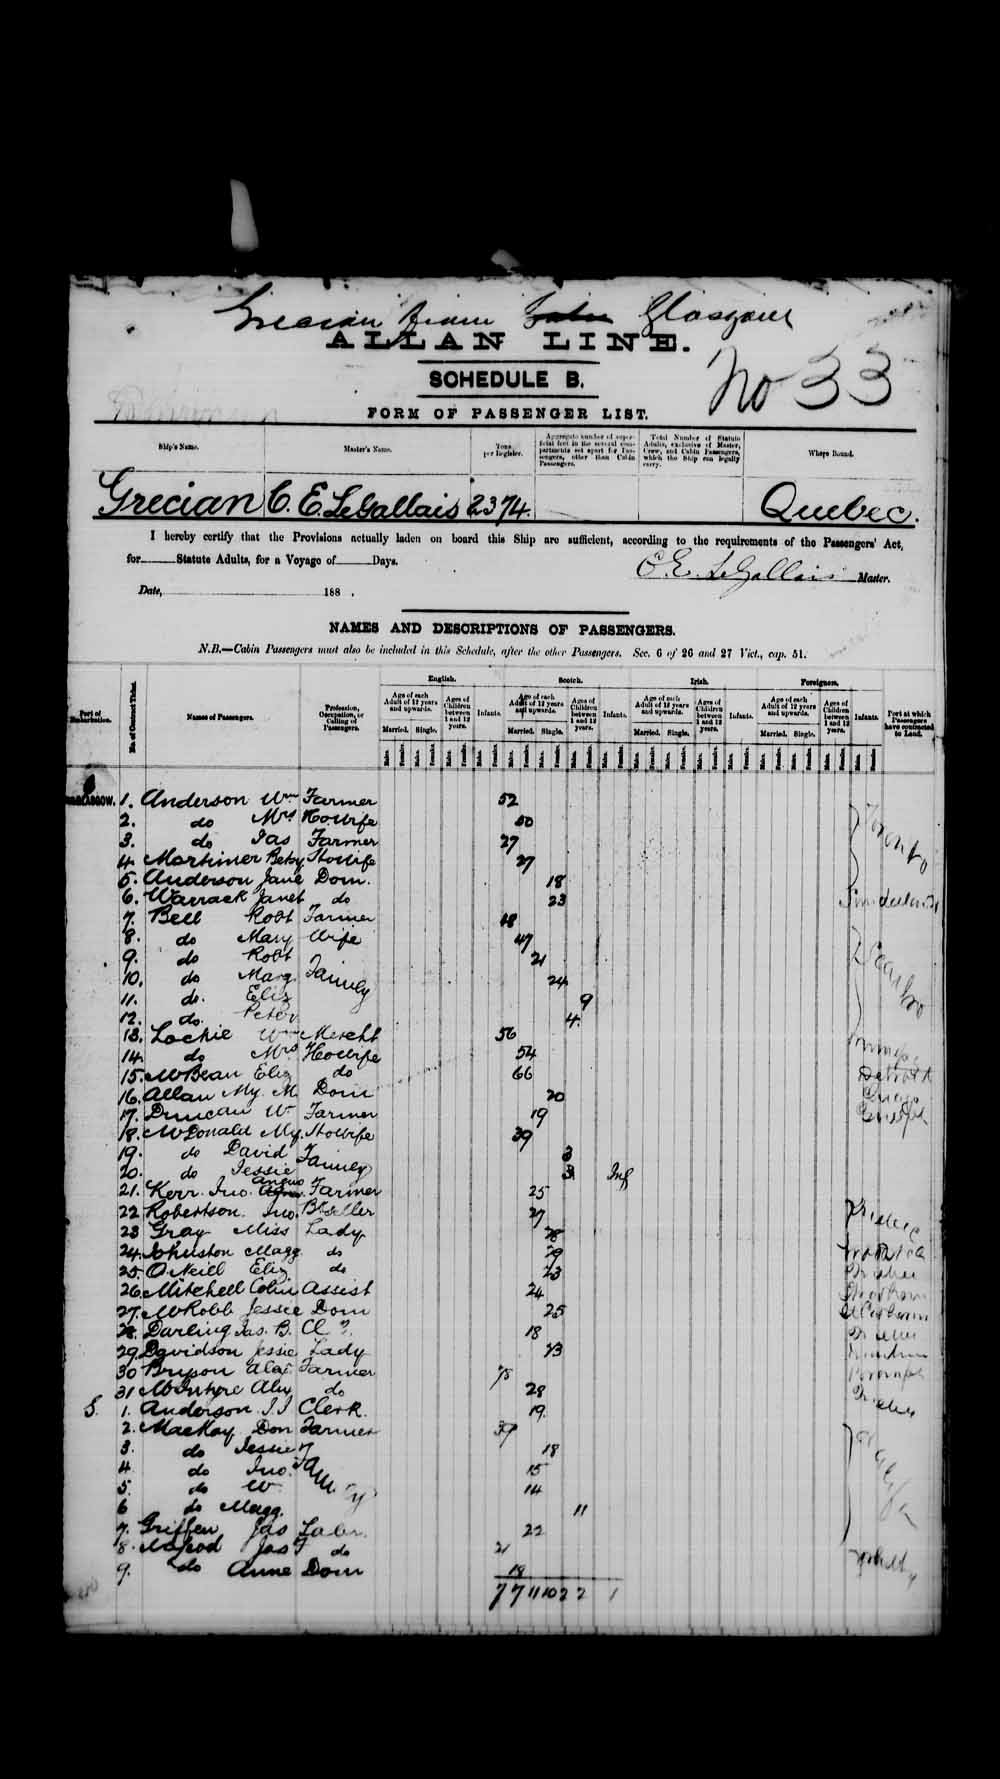 Digitized page of Passenger Lists for Image No.: e003543089